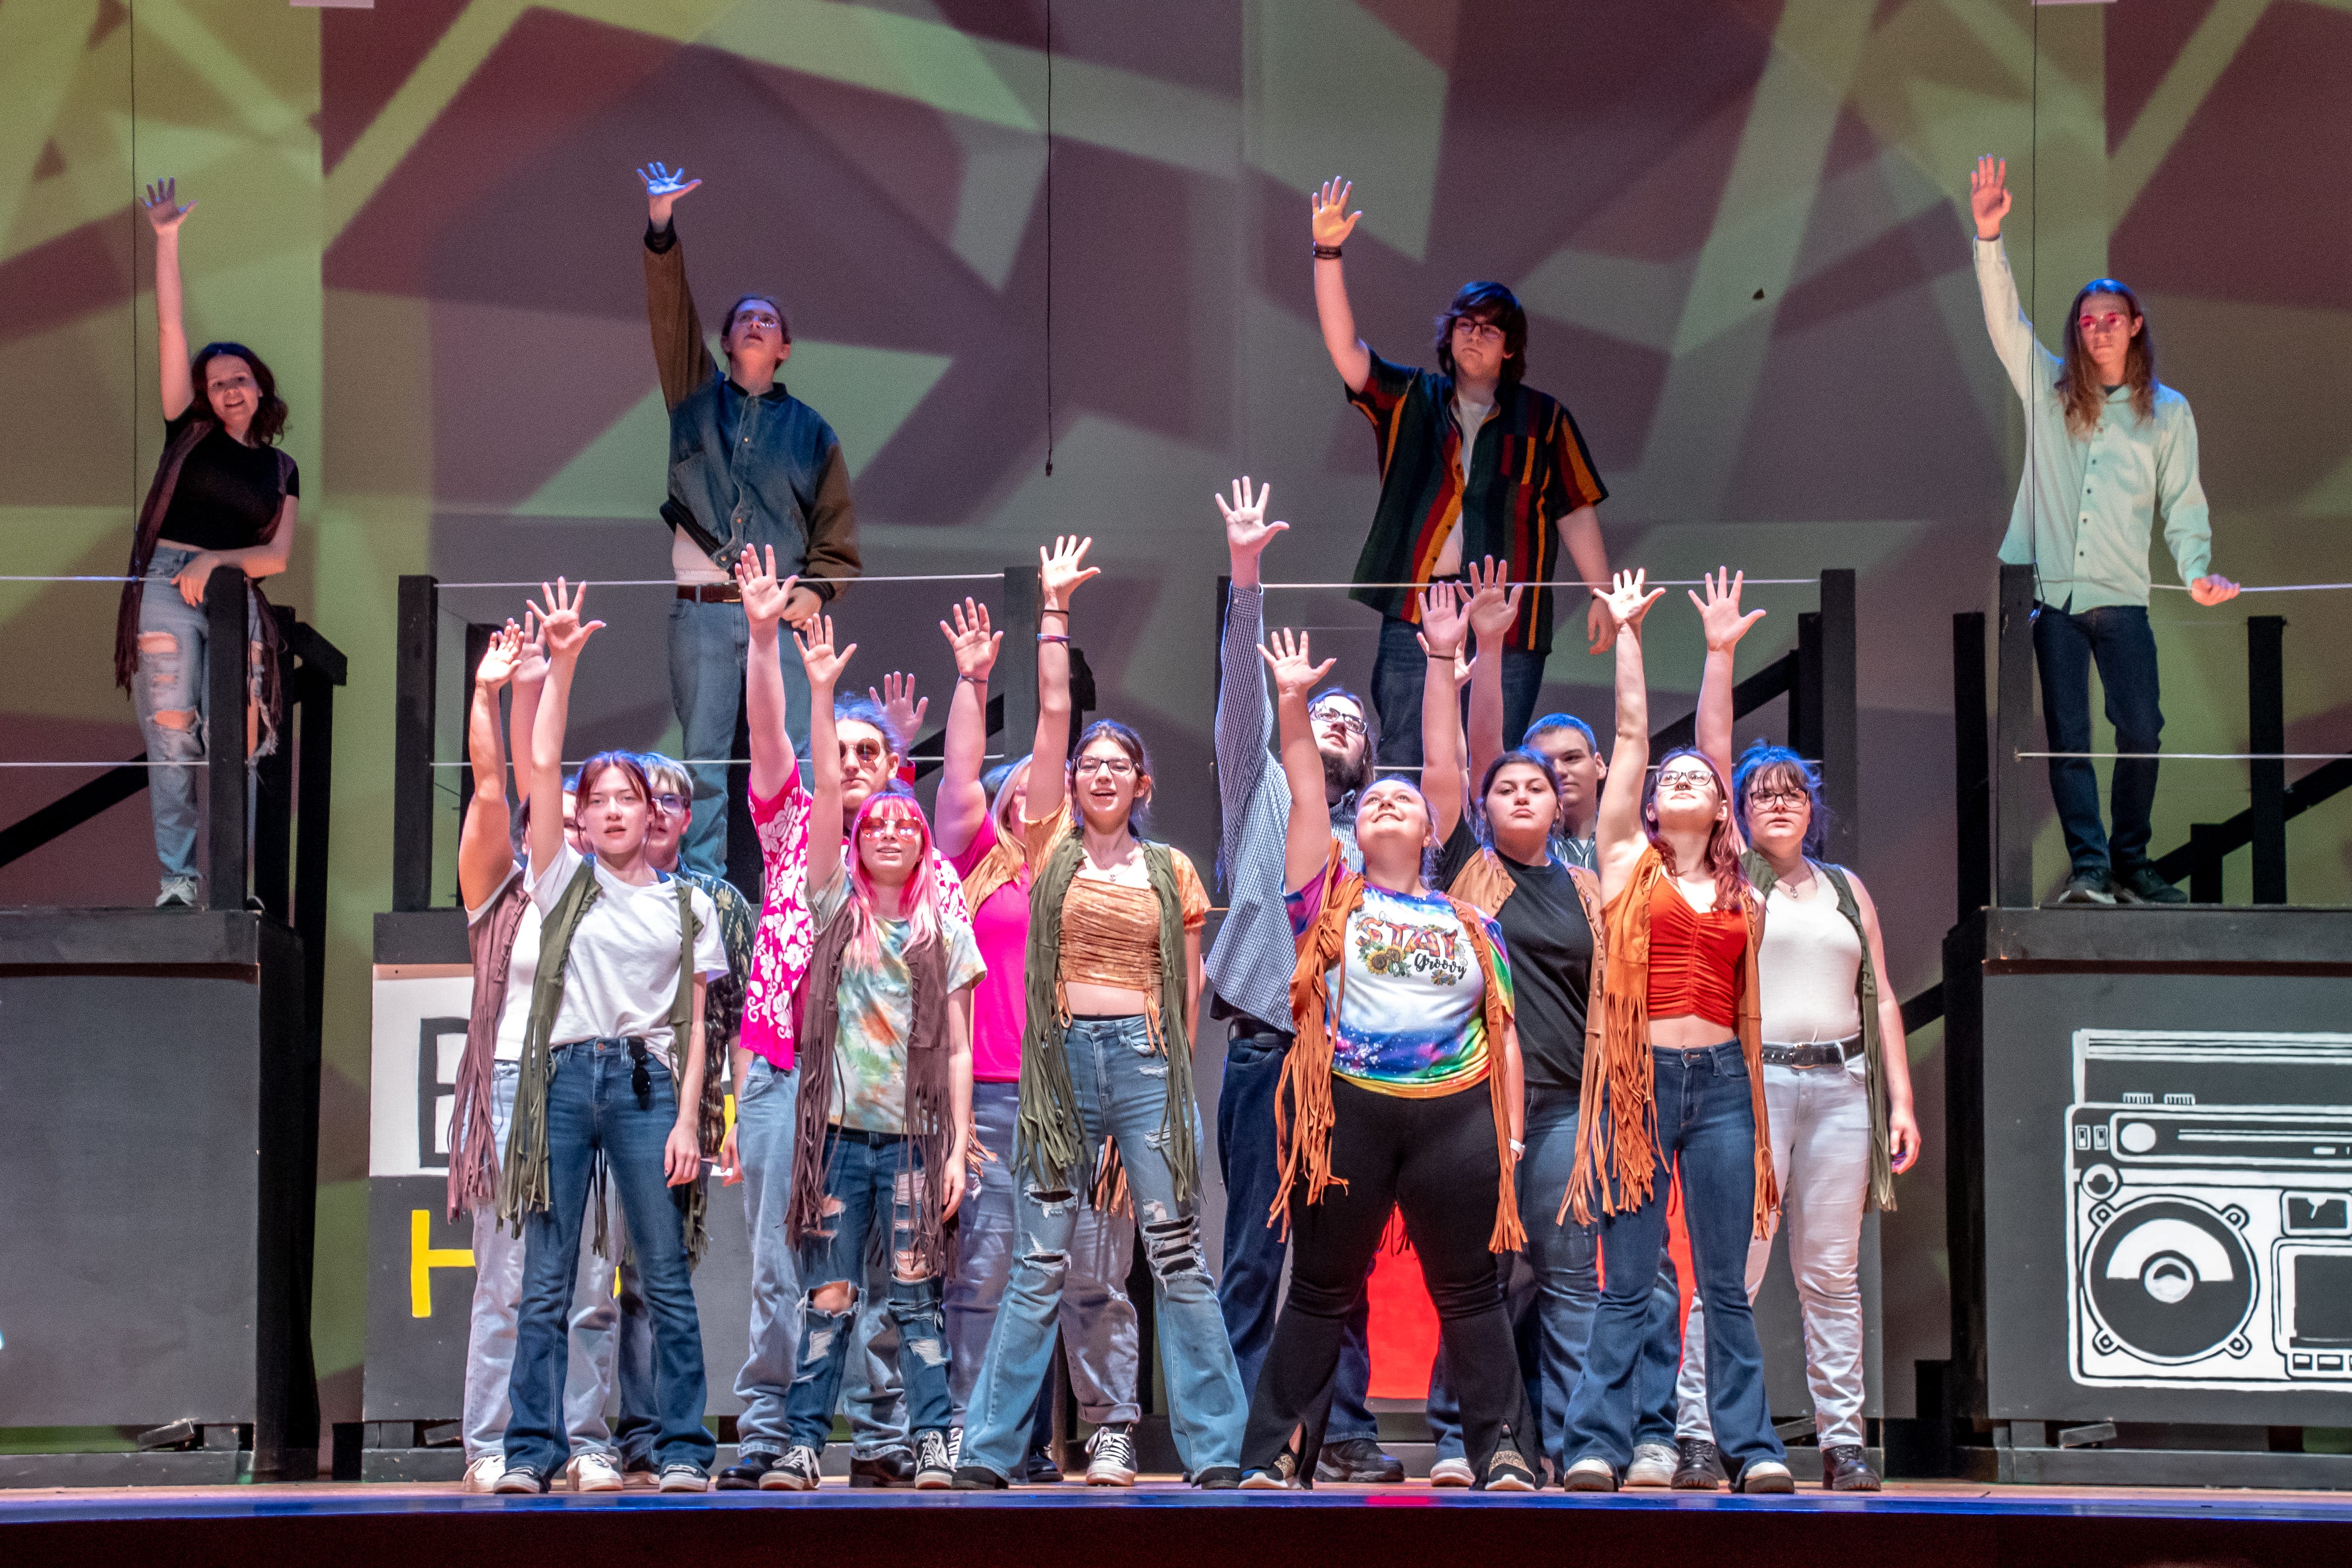 Cabaret takes the stage at Meadowbrook High School Friday and Saturday